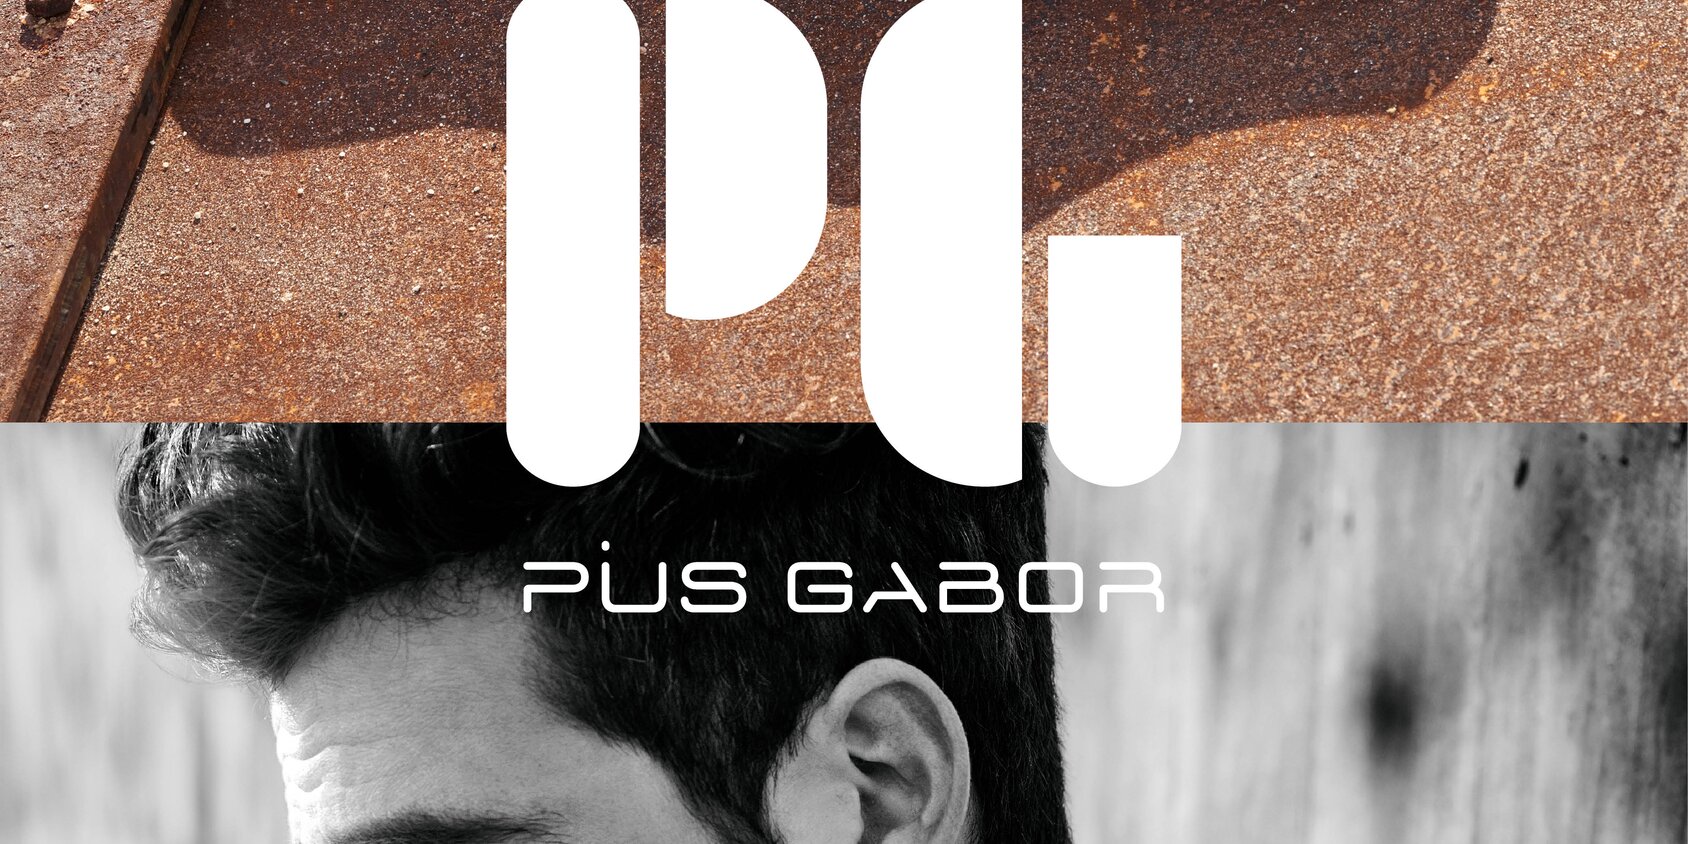 Gabor Shoes | The current Pius Gabor Collection | © Gabor Shoes AG, Rosenheim